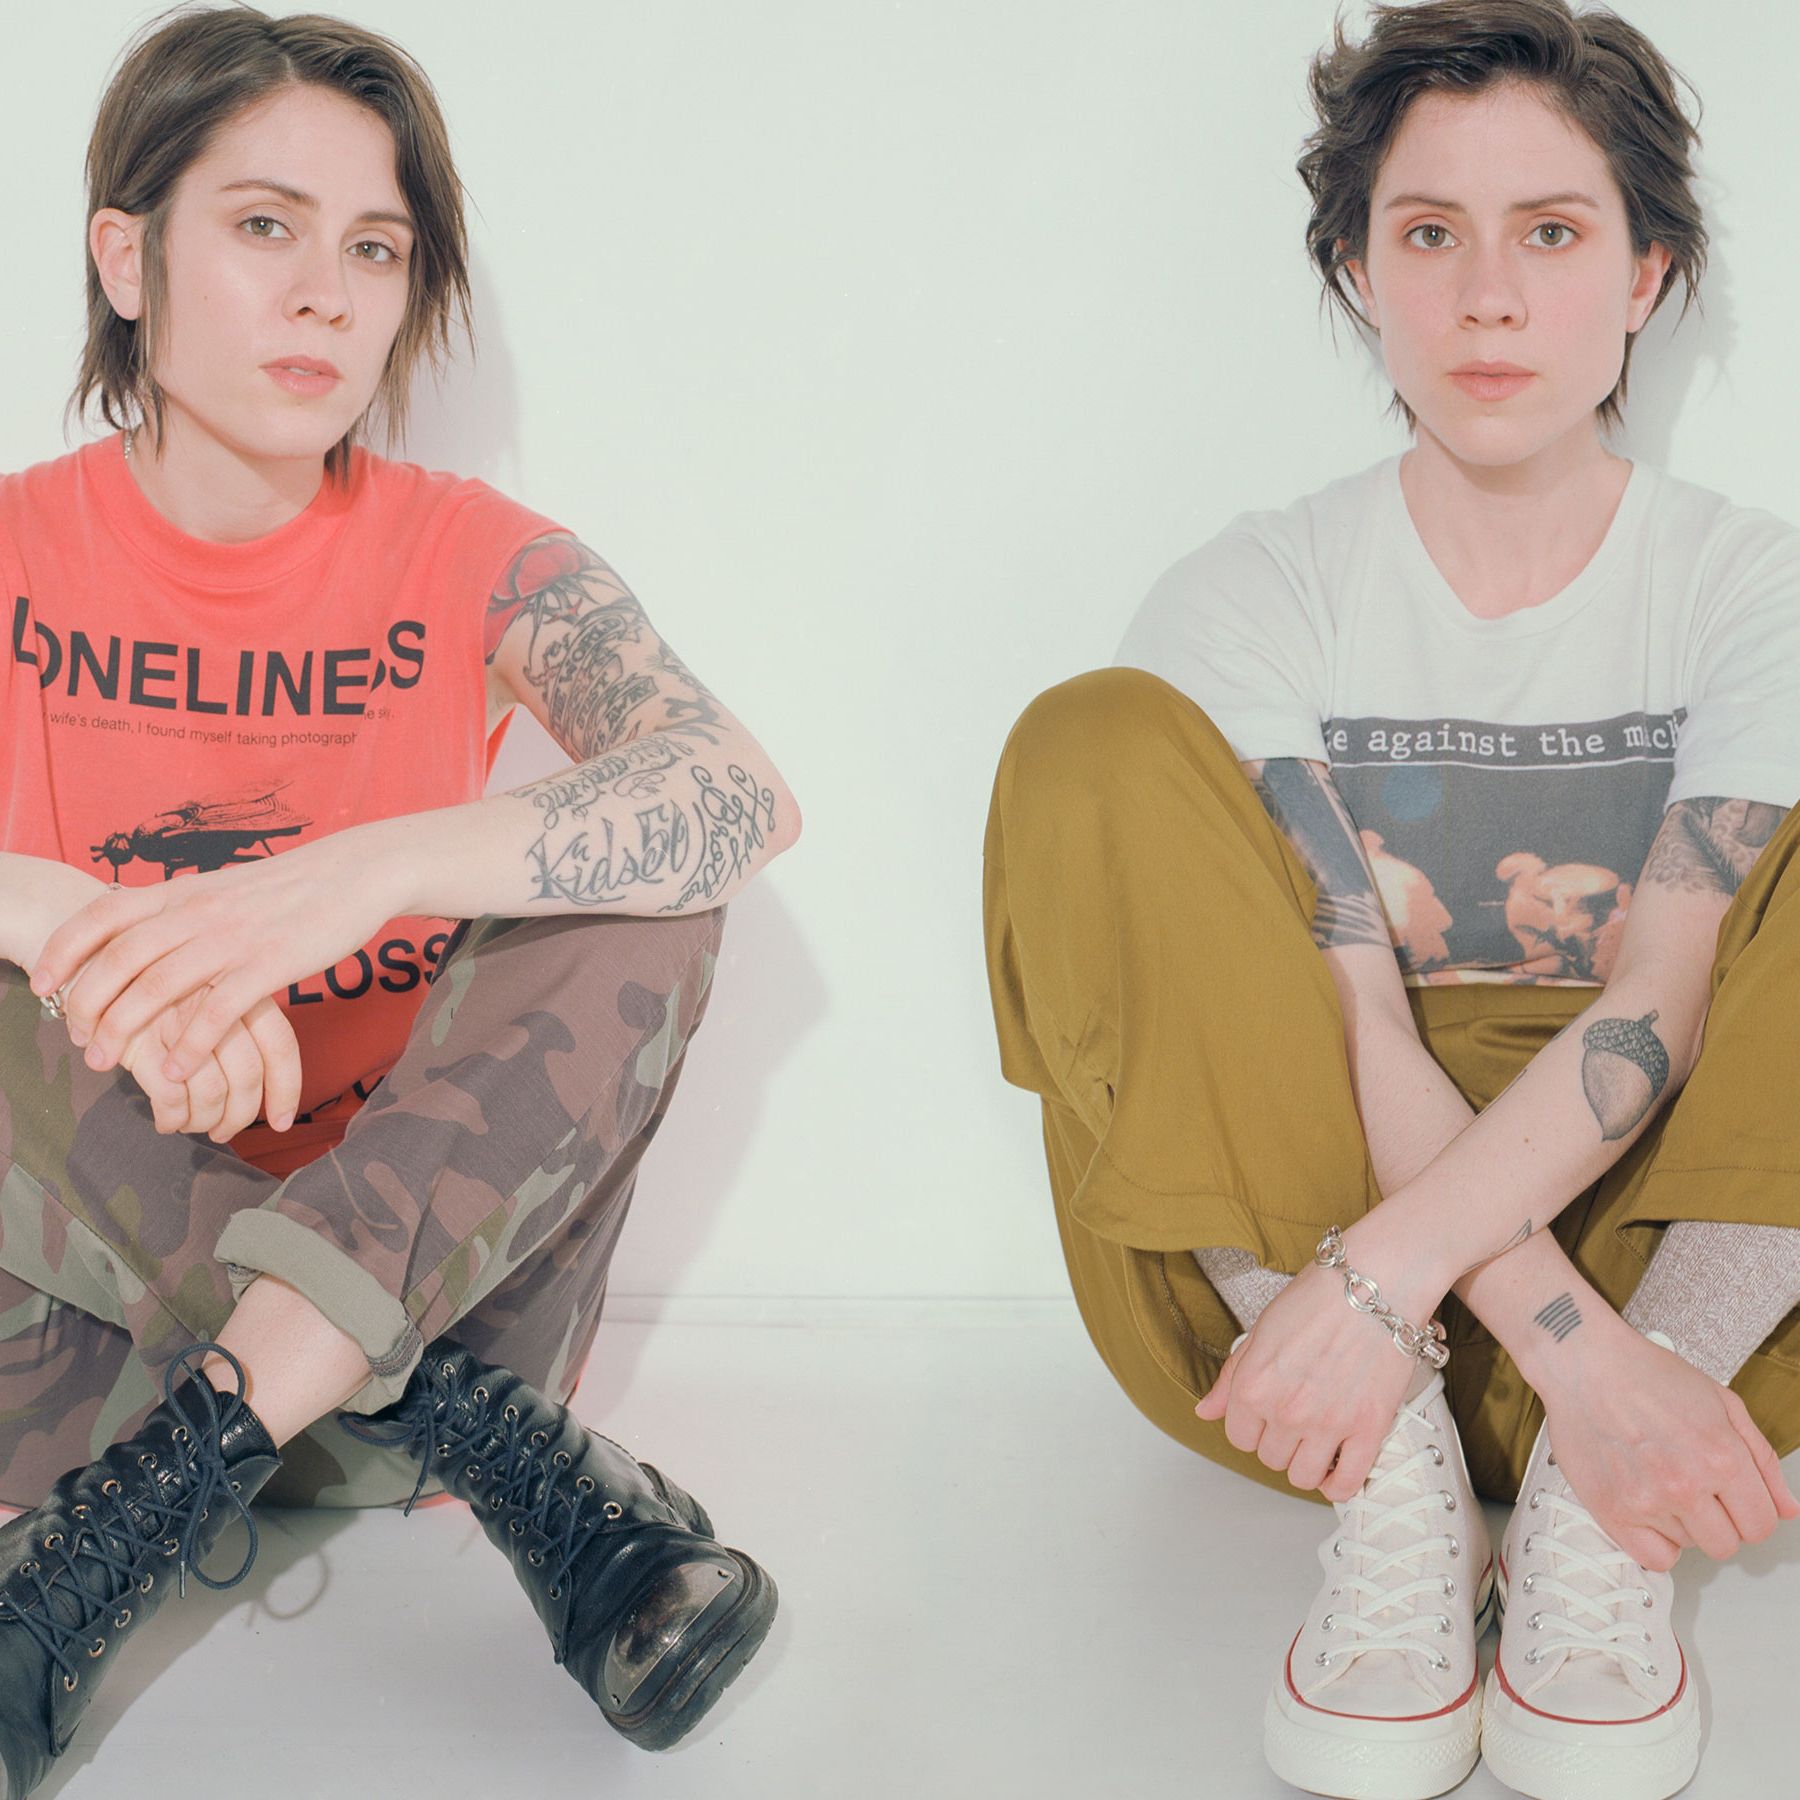 Tegan and Sara memoir 'High School' reveals they never came out to each other